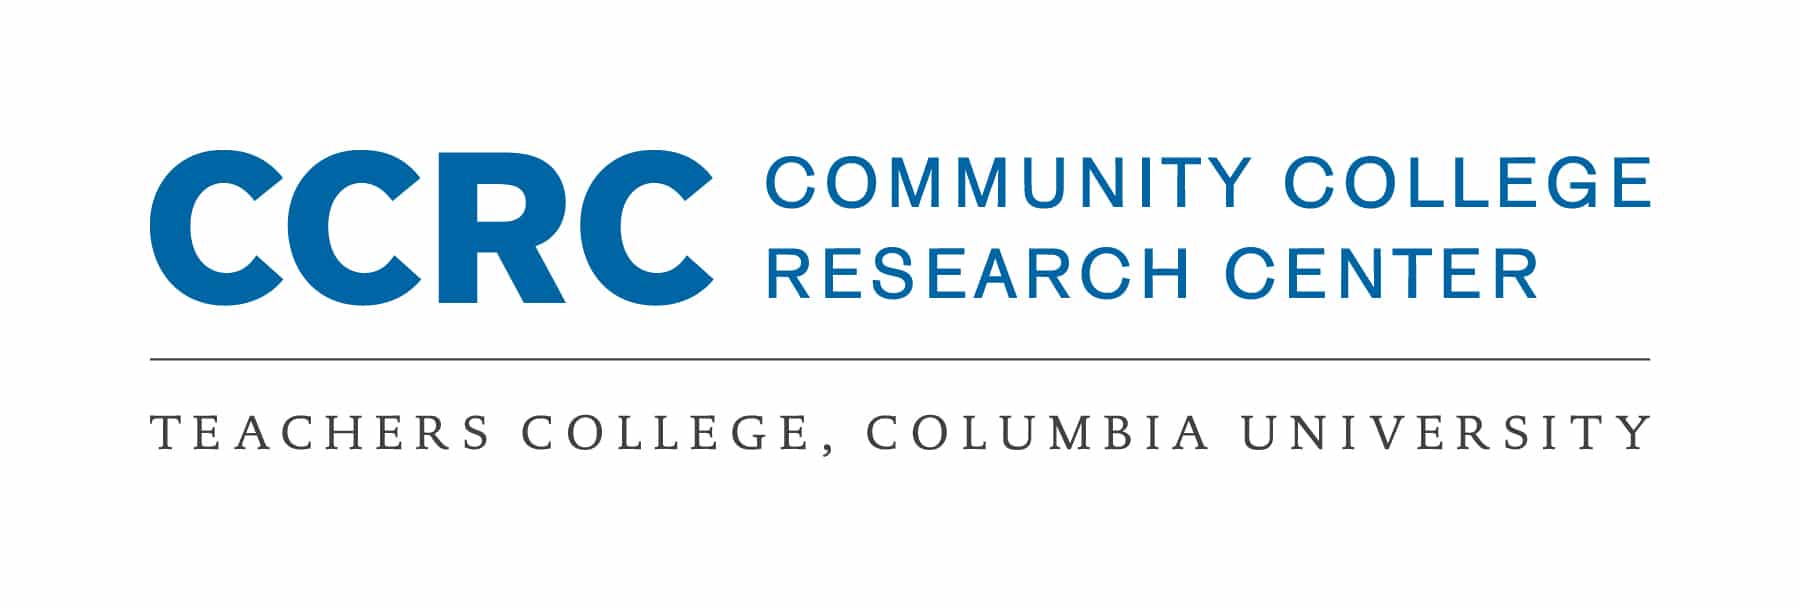 Community-College-Research-Center.